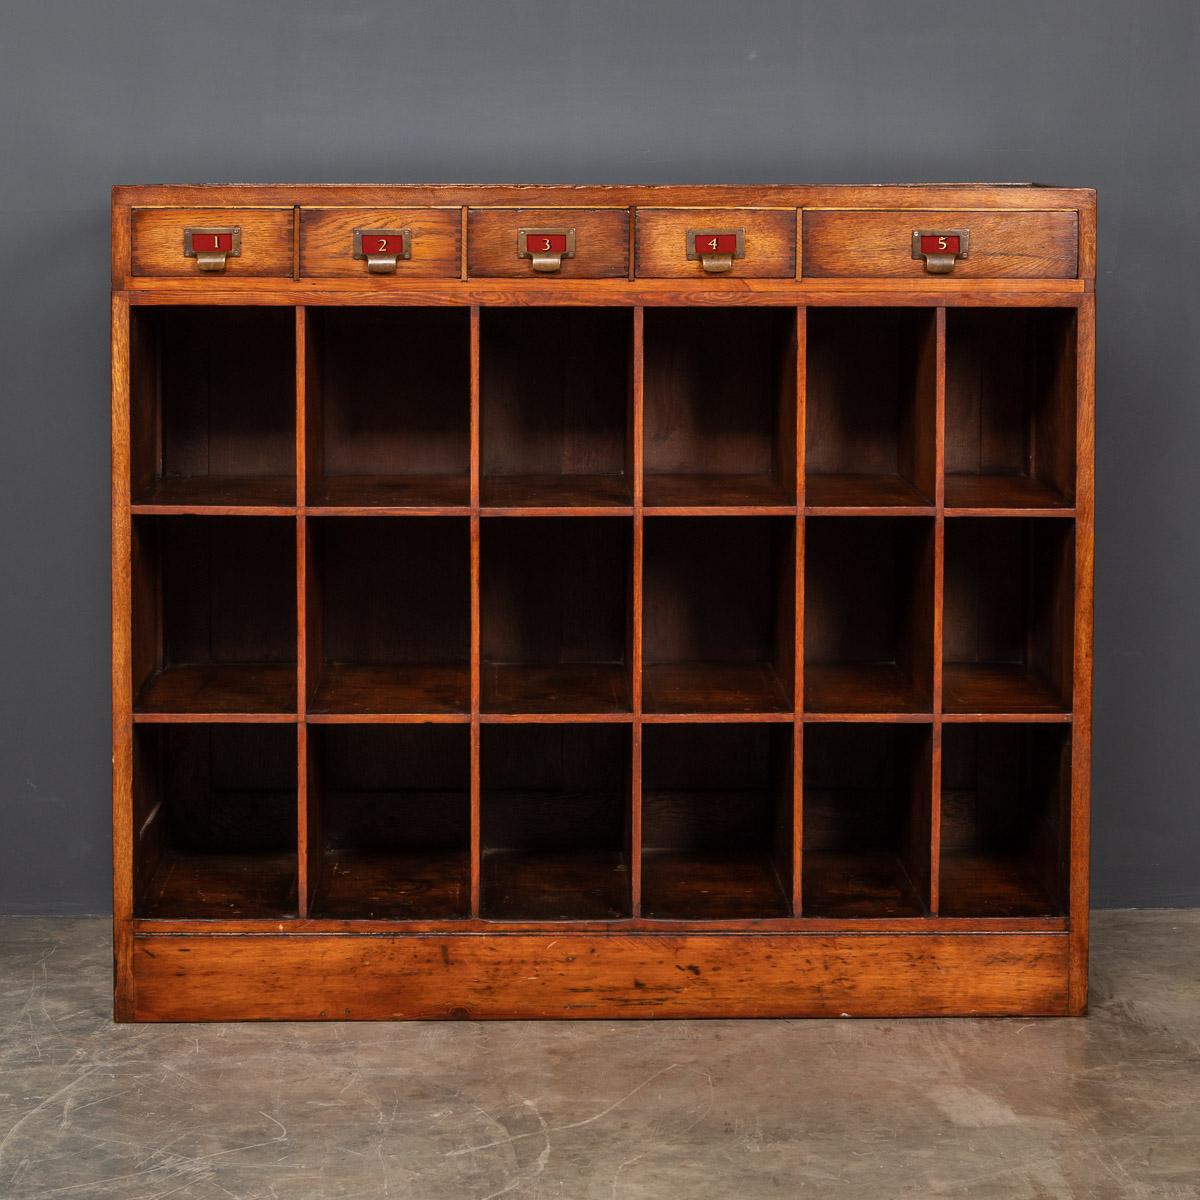 Antique 20th century English hand crafted oak haberdashery, this unit would have been undoubtedly used in a prestigious gentleman's clothing store in the fashionable 1930's. This piece has five retractable trays and a see through glass counter,